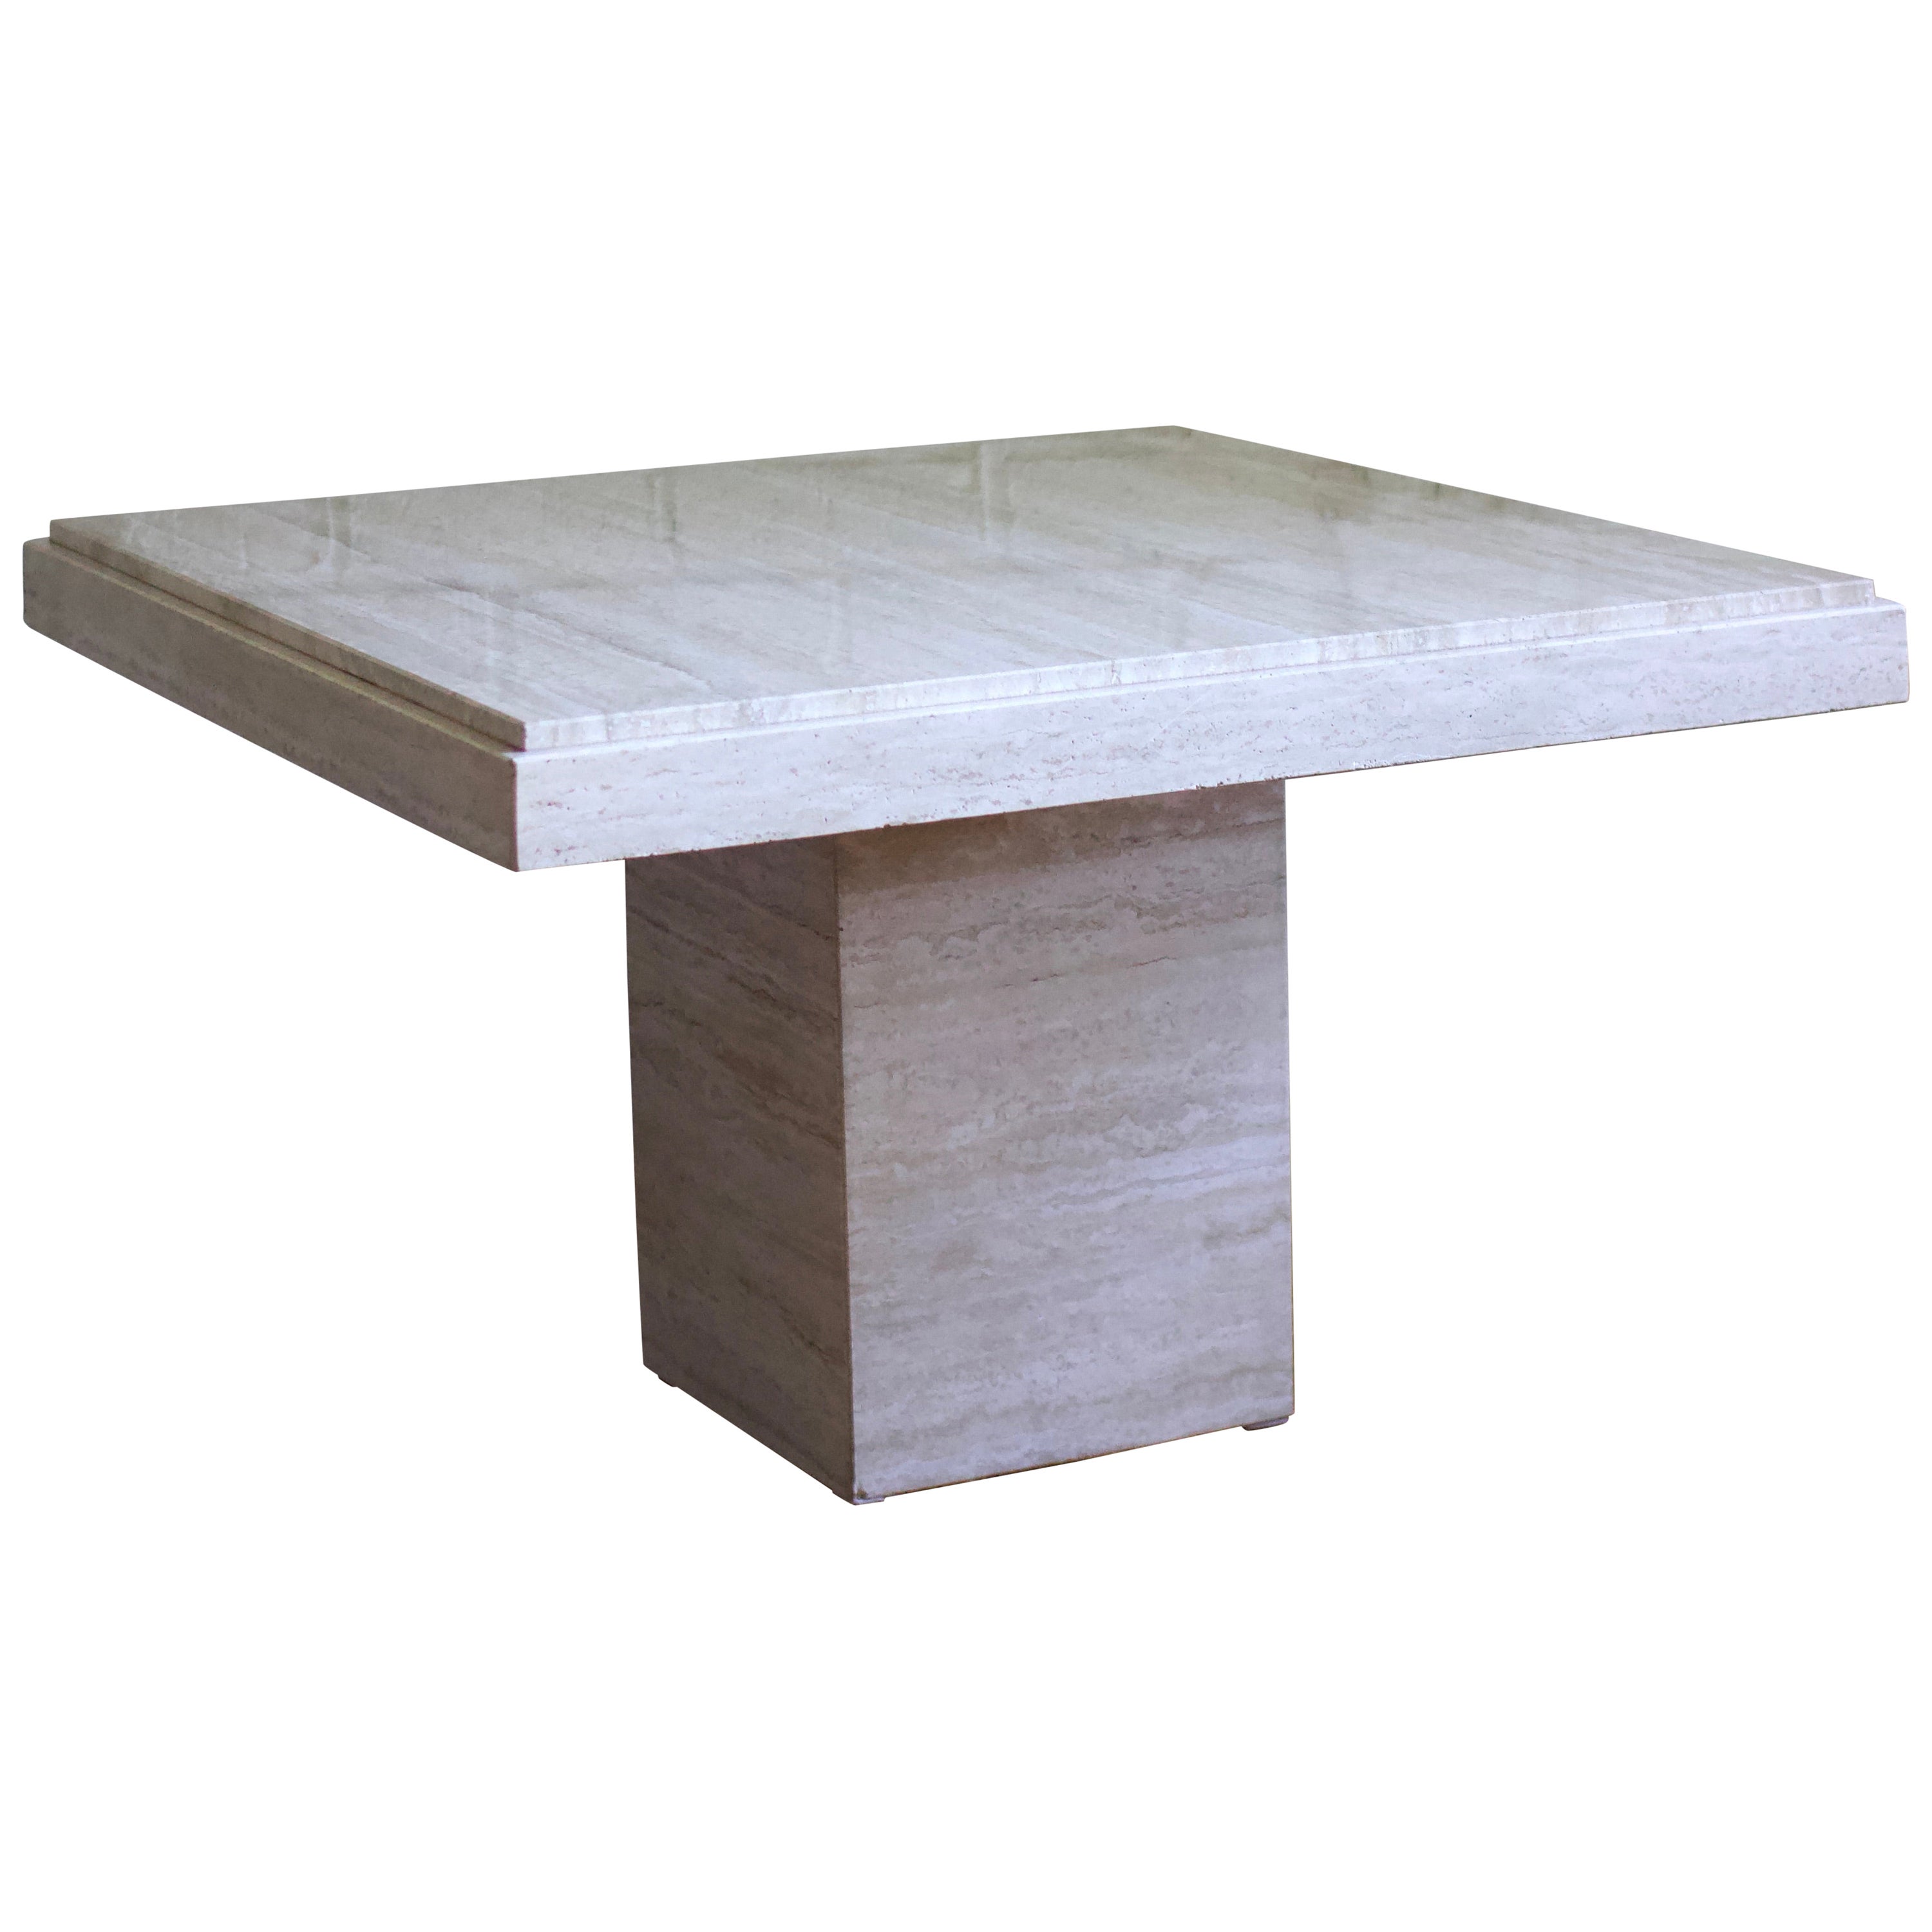 1980s Square Travertine Coffee Table, Made in Italy